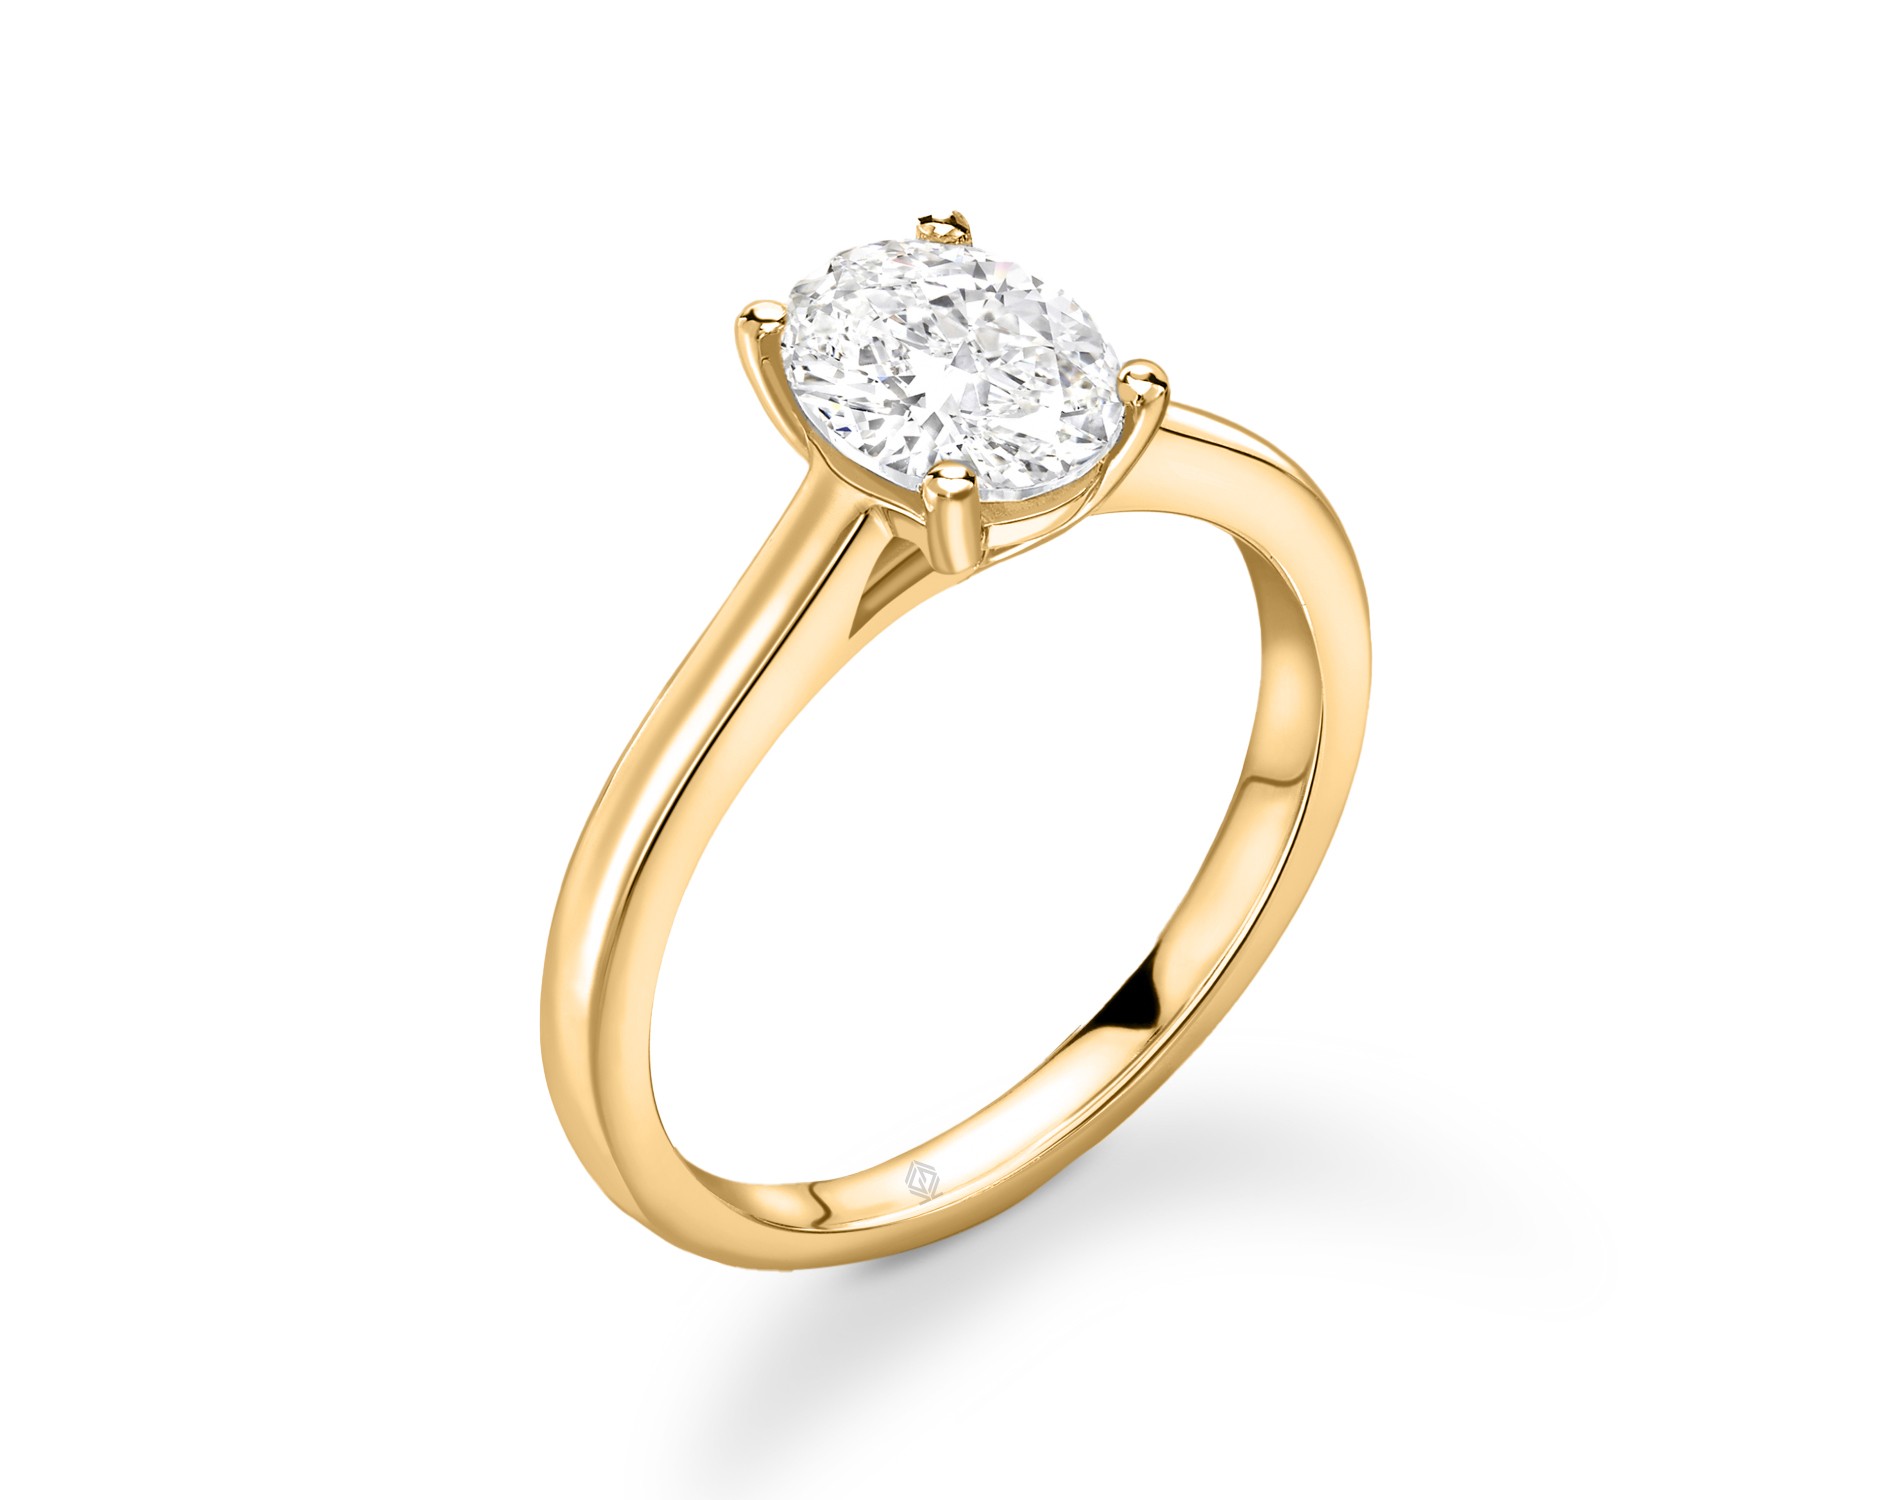 18K YELLOW GOLD OVAL CUT SOLITAIRE DIAMOND ENGAGEMENT RING